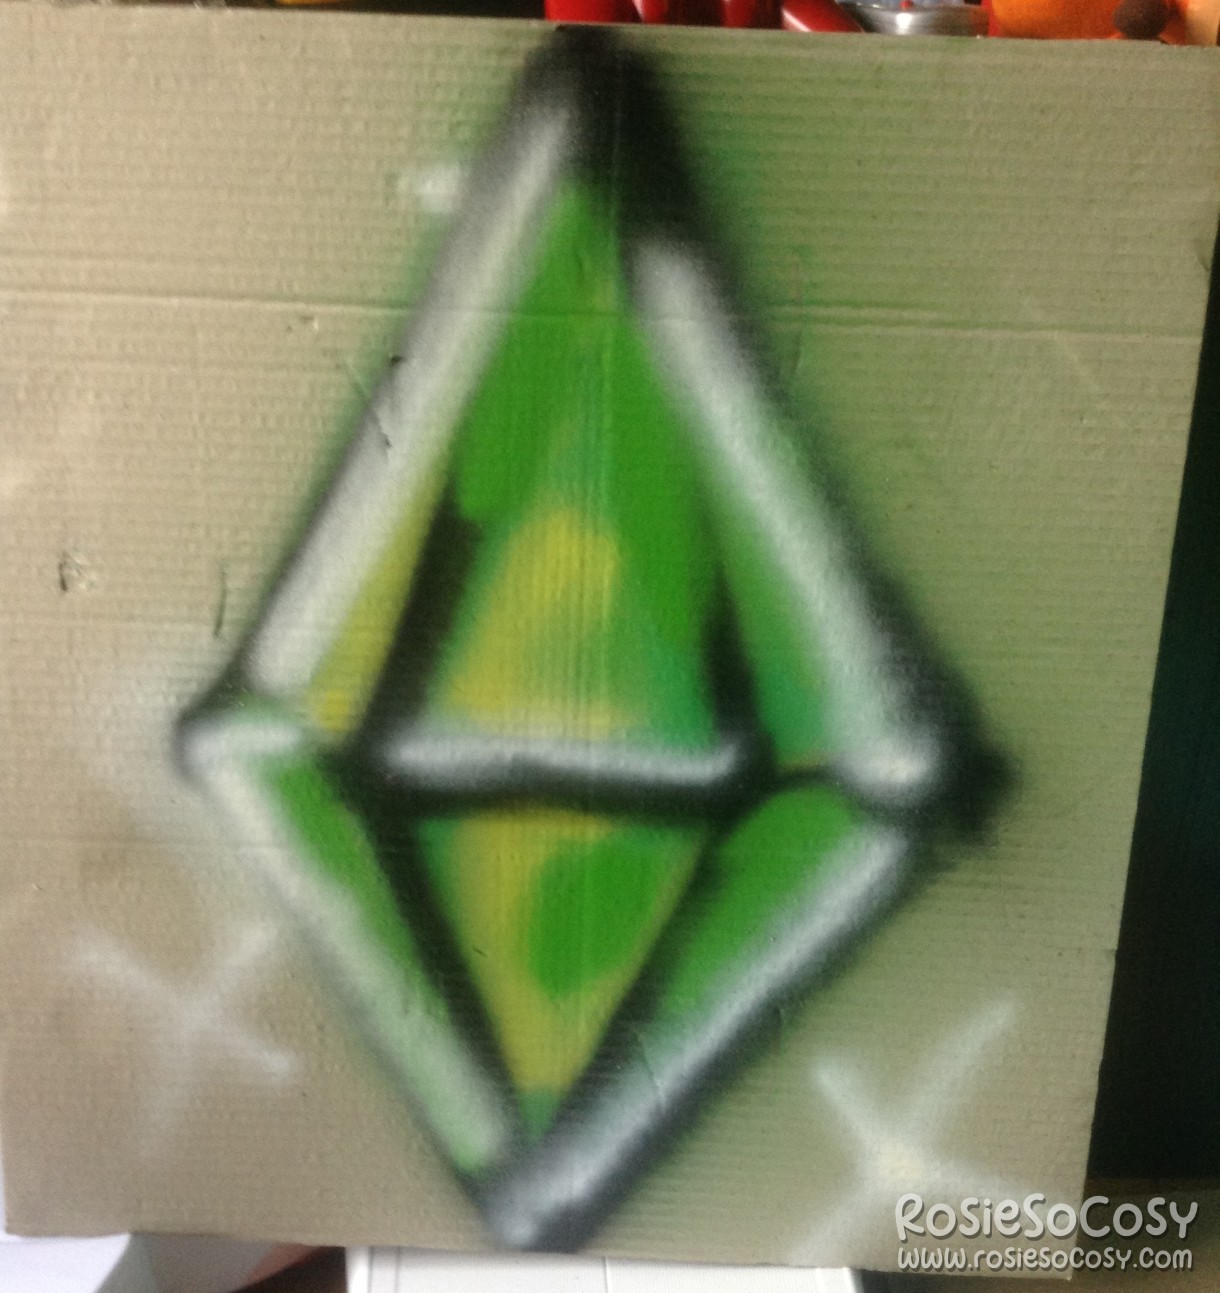 A piece of cardboard with a giant graffiti plumbob on it. It's a green plumbob with black outlines, and white highlights inside.